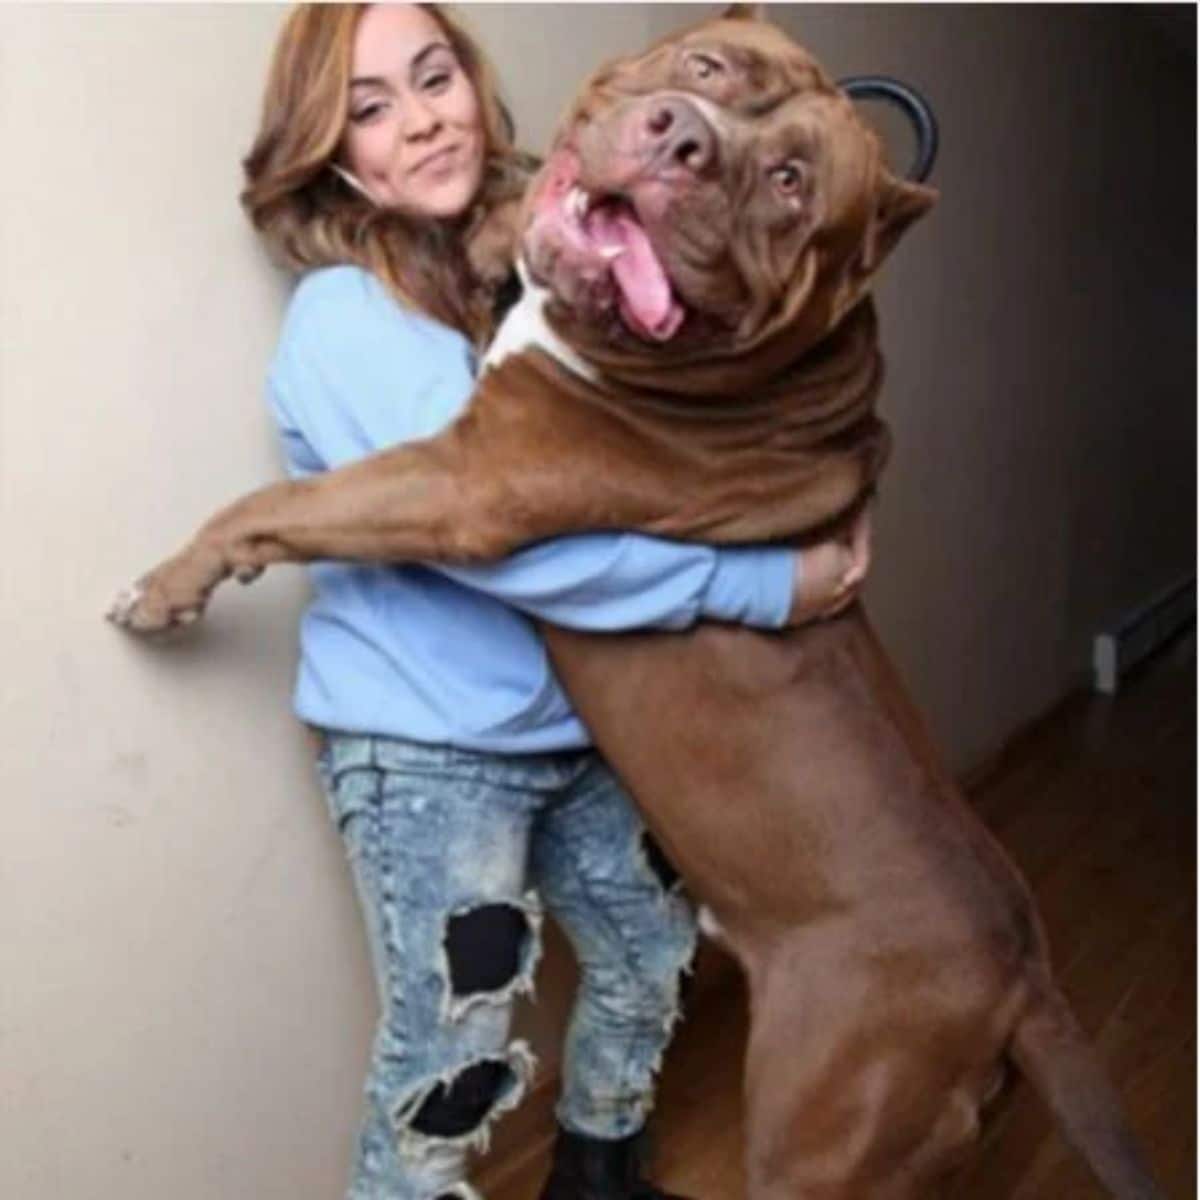 large brown and white dog standing on hind legs and being hugged by a woman